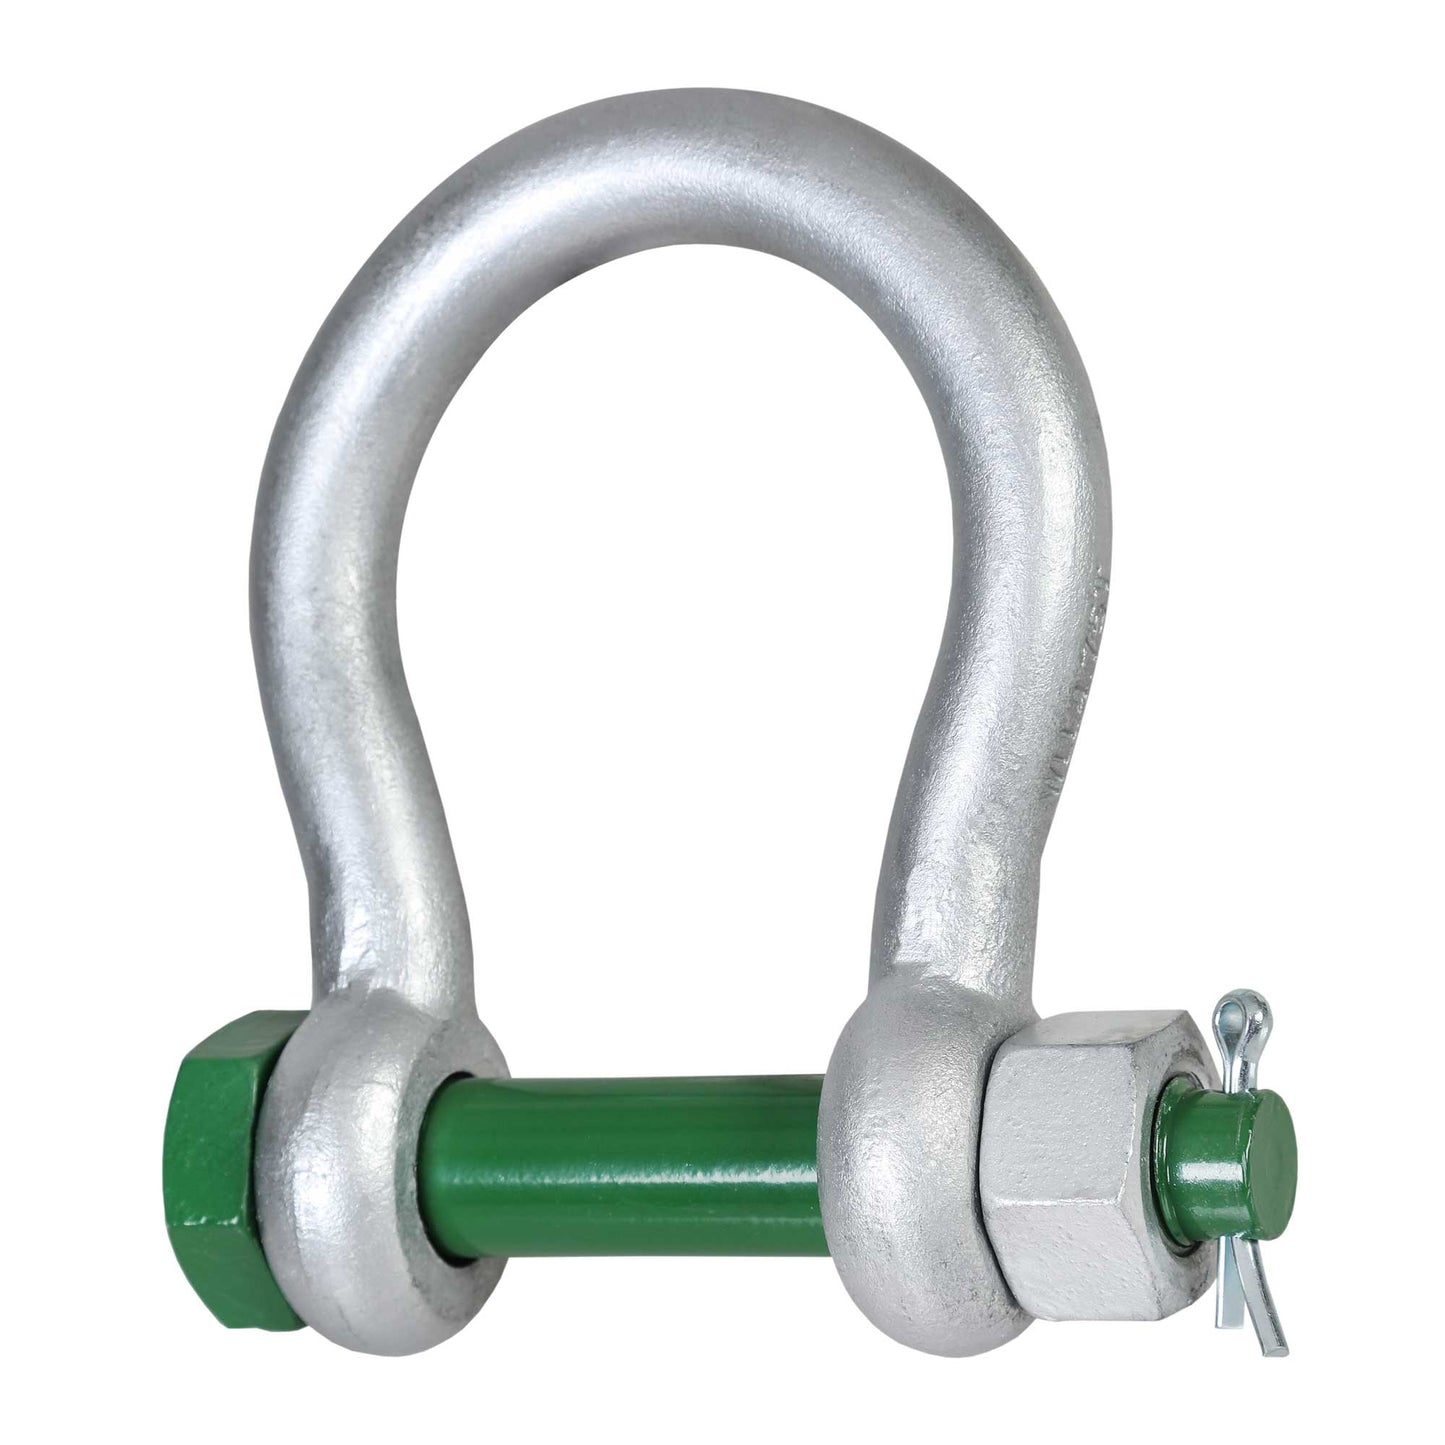 7/8" Van Beest Green Pin® Bolt Type Wide Mouth Towing Shackle | G-4263 - 4.75 Ton primary image